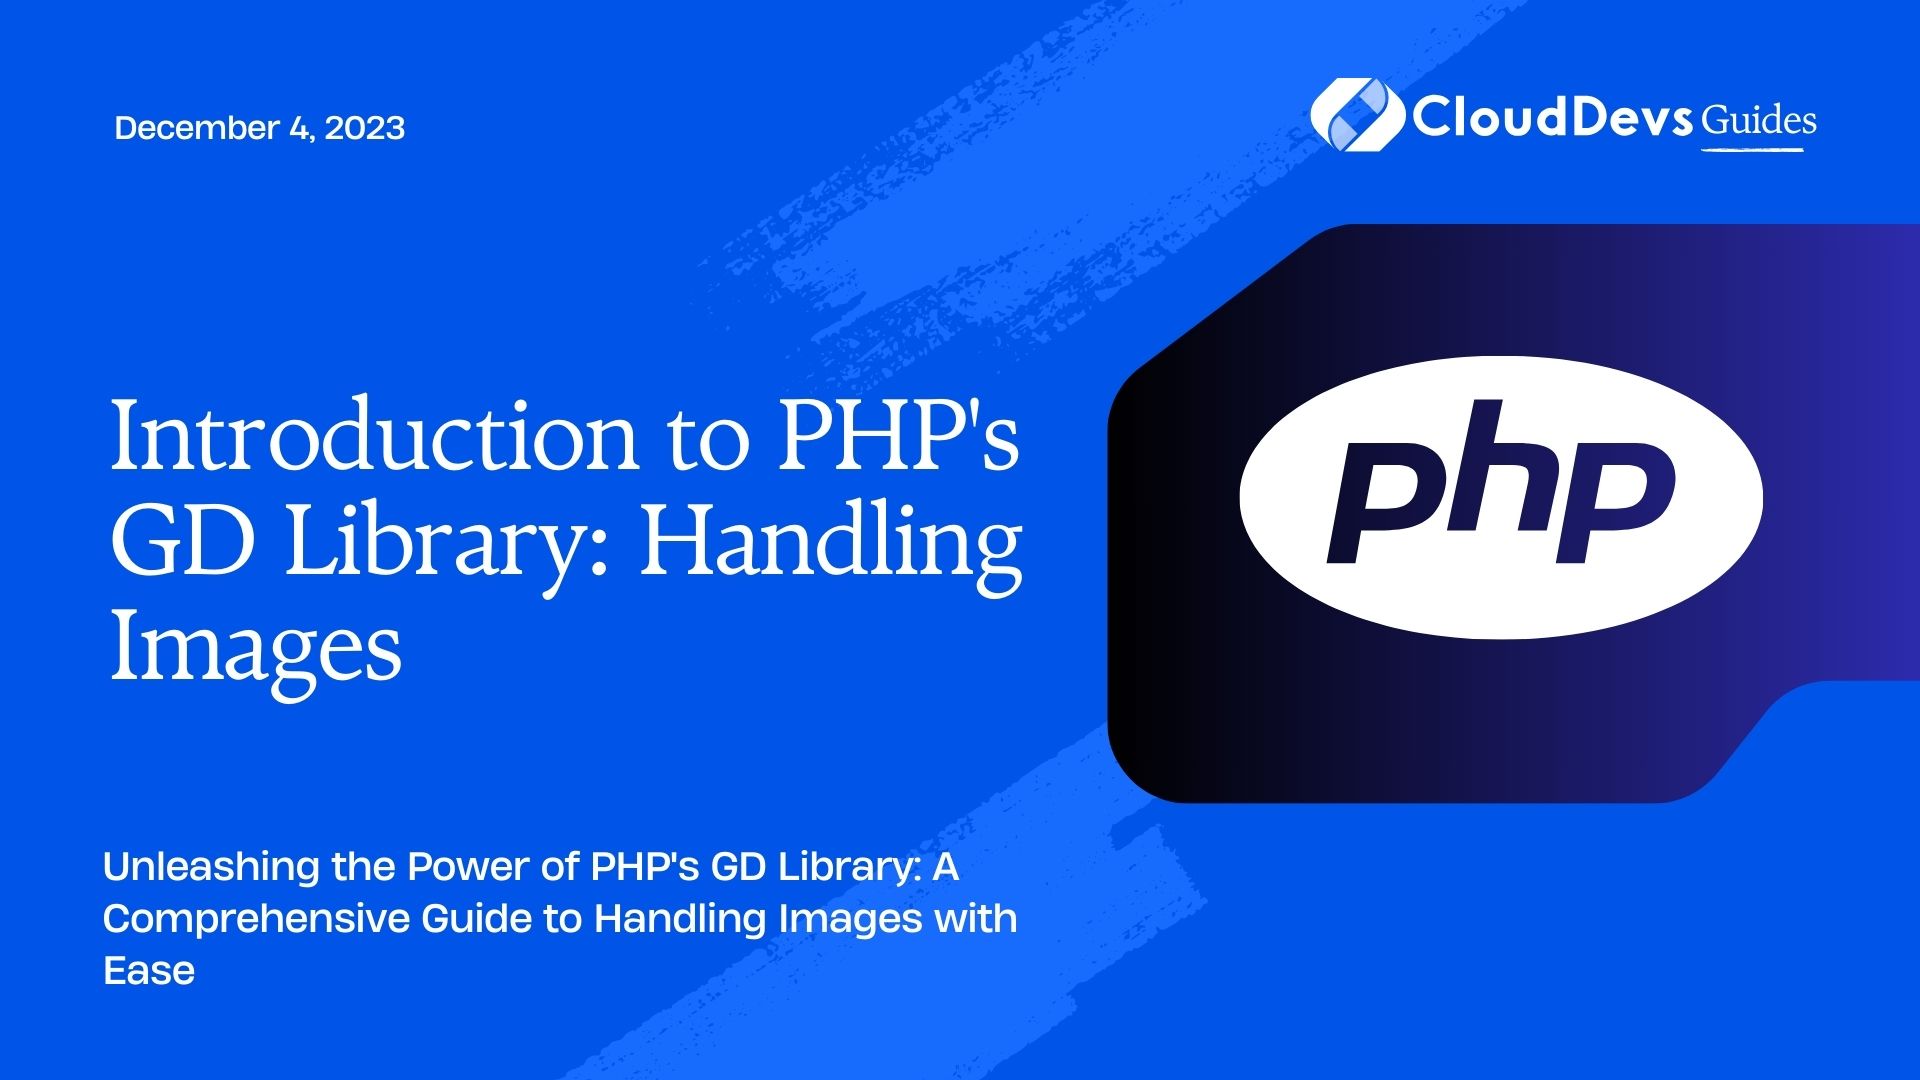 Introduction to PHP's GD Library: Handling Images